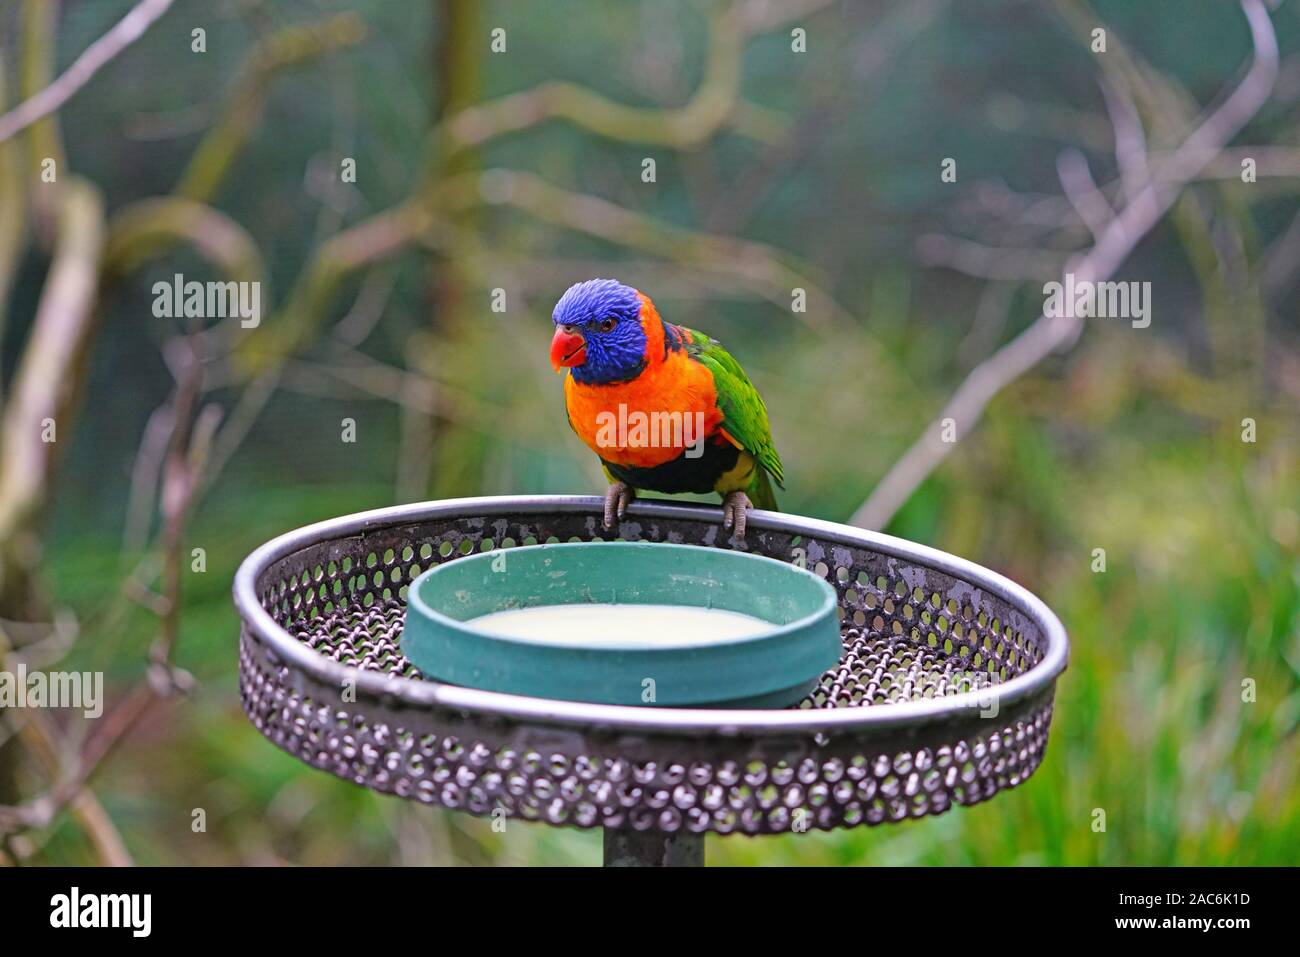 View of a colorful lorikeet bird in Melbourne, Australia Stock Photo